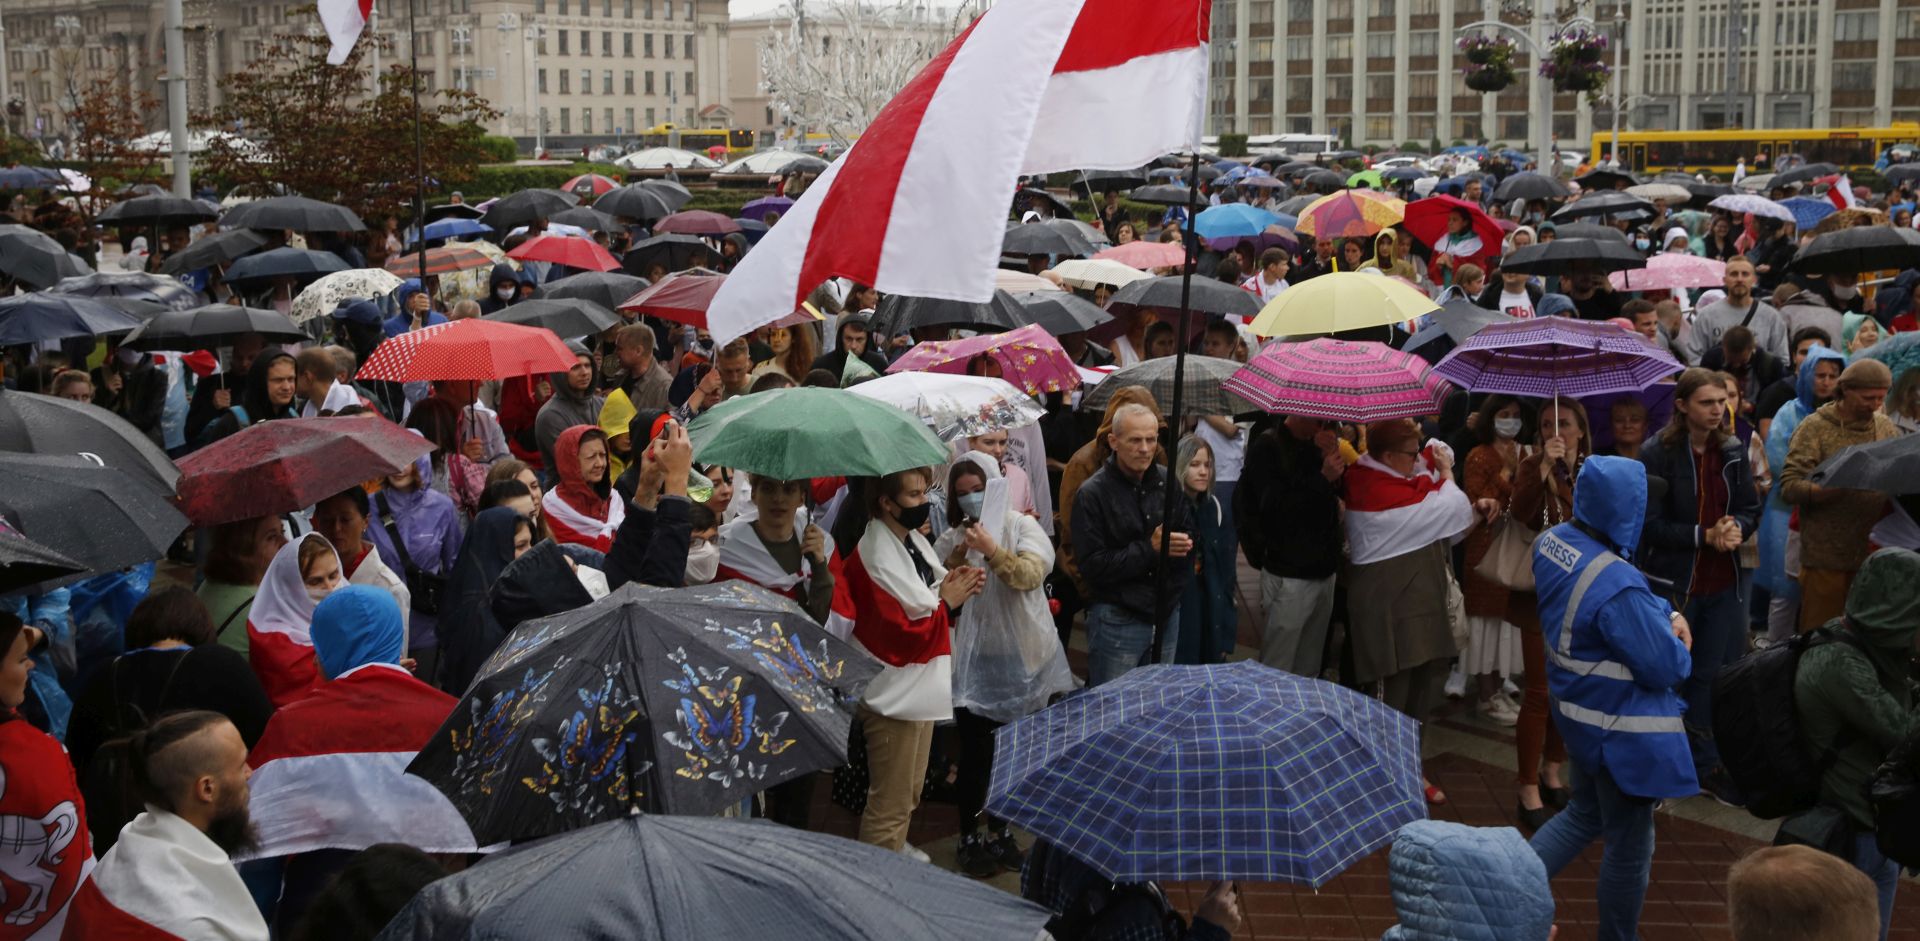 epa08624823 Belarus opposition activists attend under rain a protest rally against the results of the presidential elections, in Minsk, Belarus 25 August 2020. Opposition in Belarus alleges poll-rigging and police violence at protests following election results claiming that president Lukashenko had won a landslide victory in the 09 August elections.  EPA/TATYANA ZENKOVICH